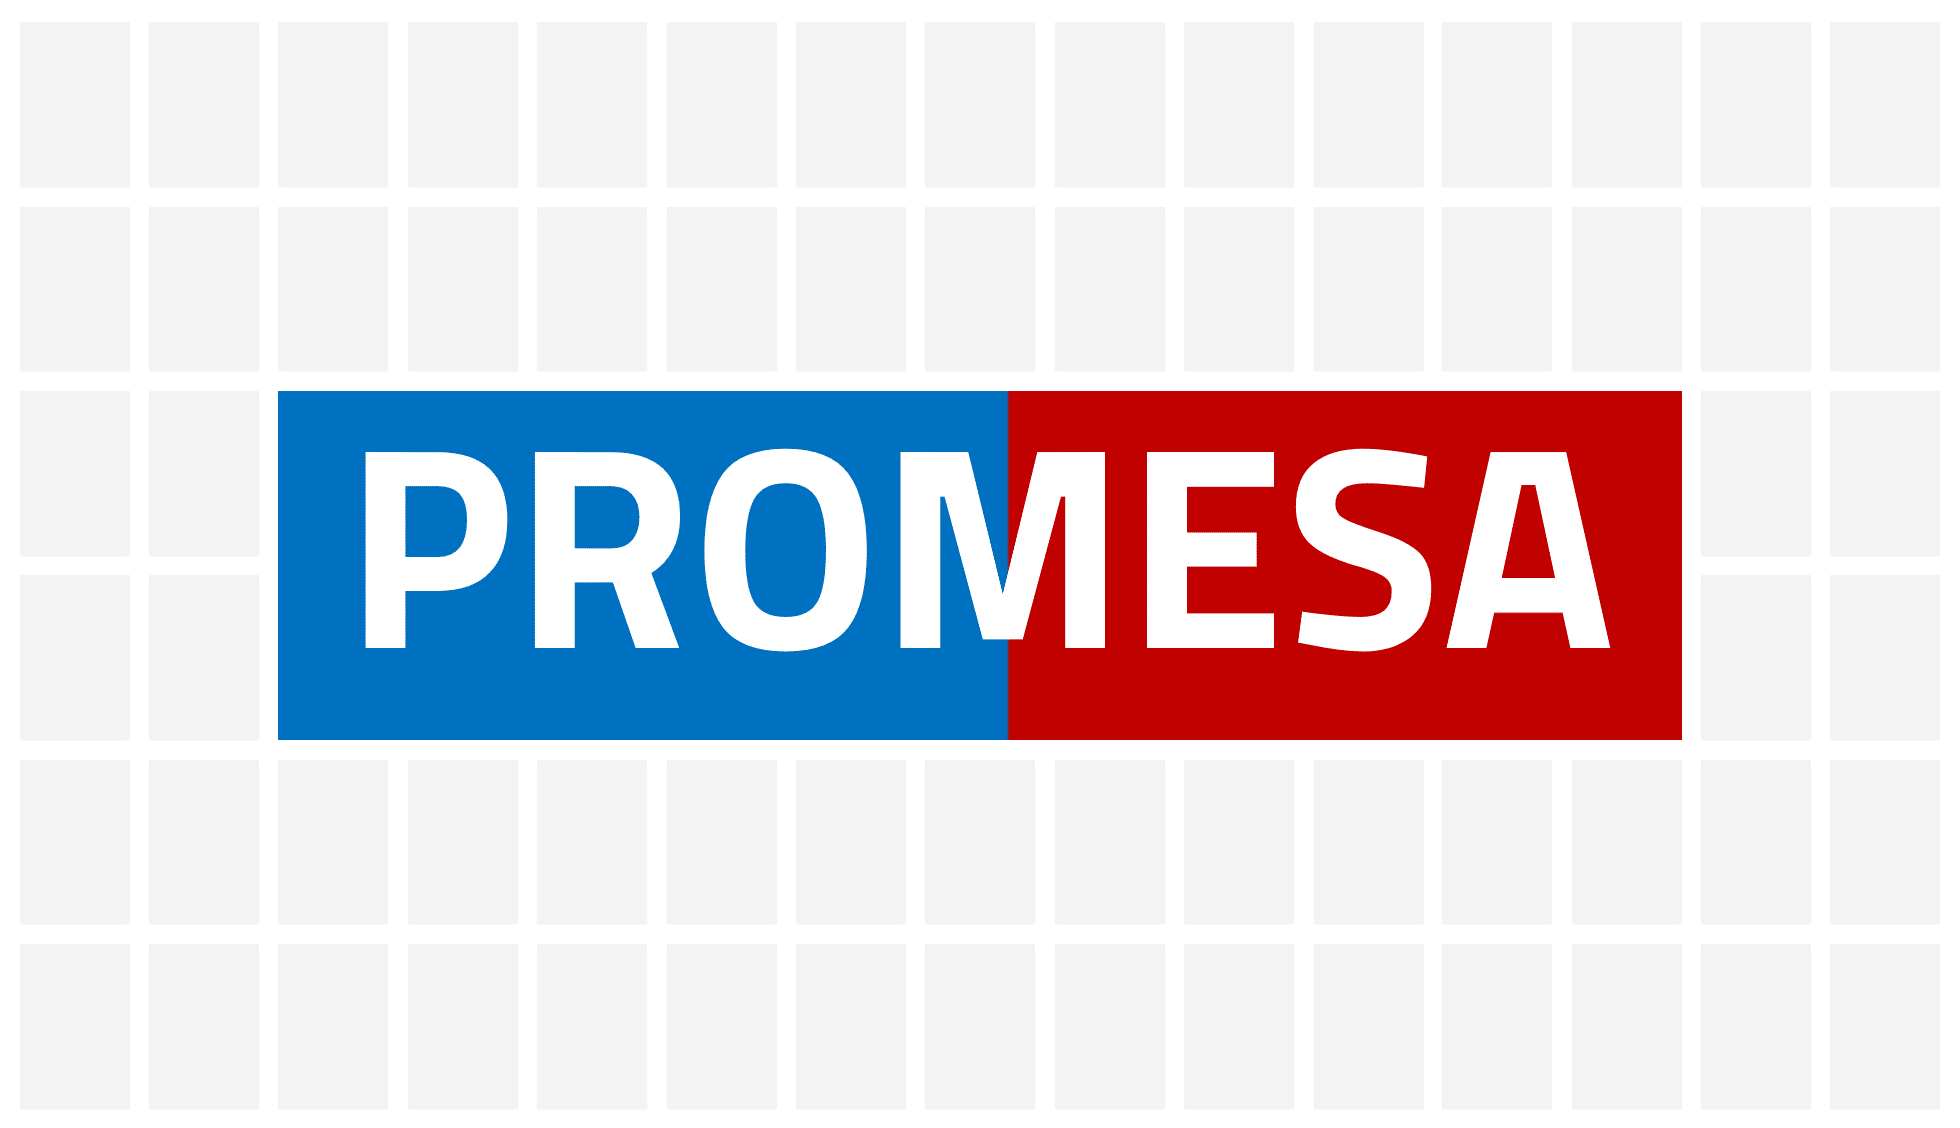 Opinion on PROMESA remains divided